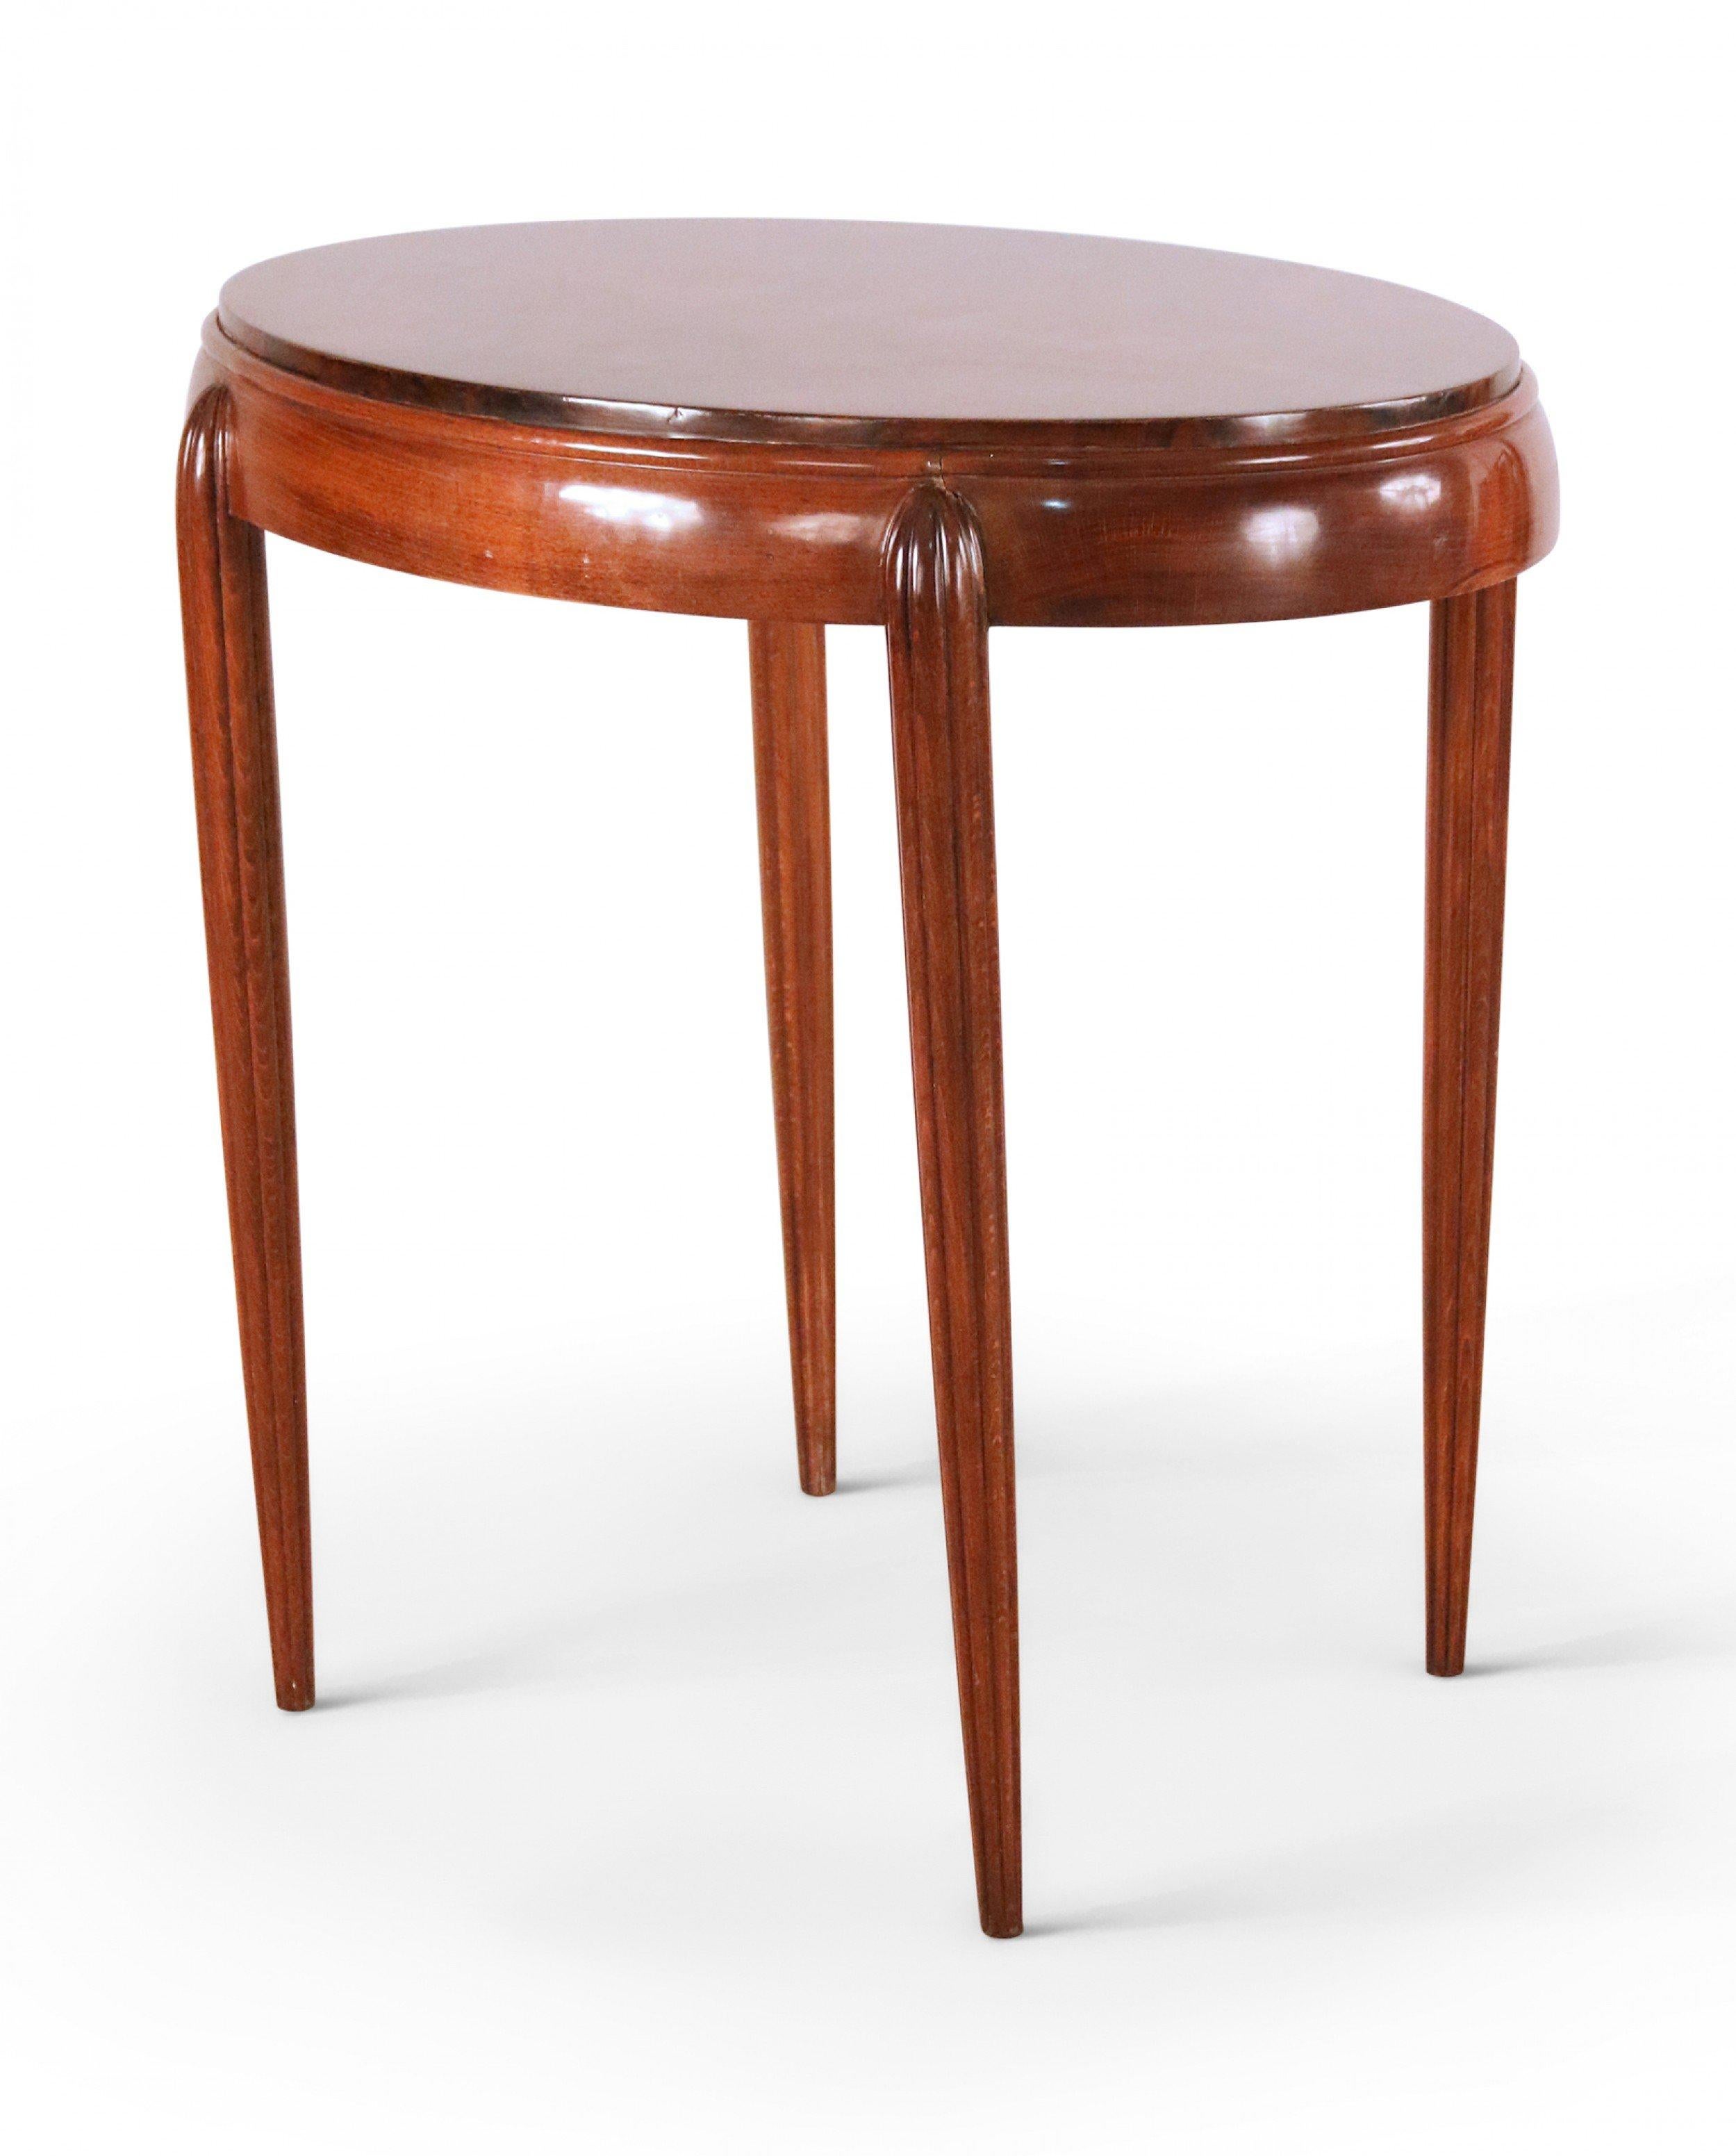 20th Century Art Deco Style Oval Mahogany End Table For Sale